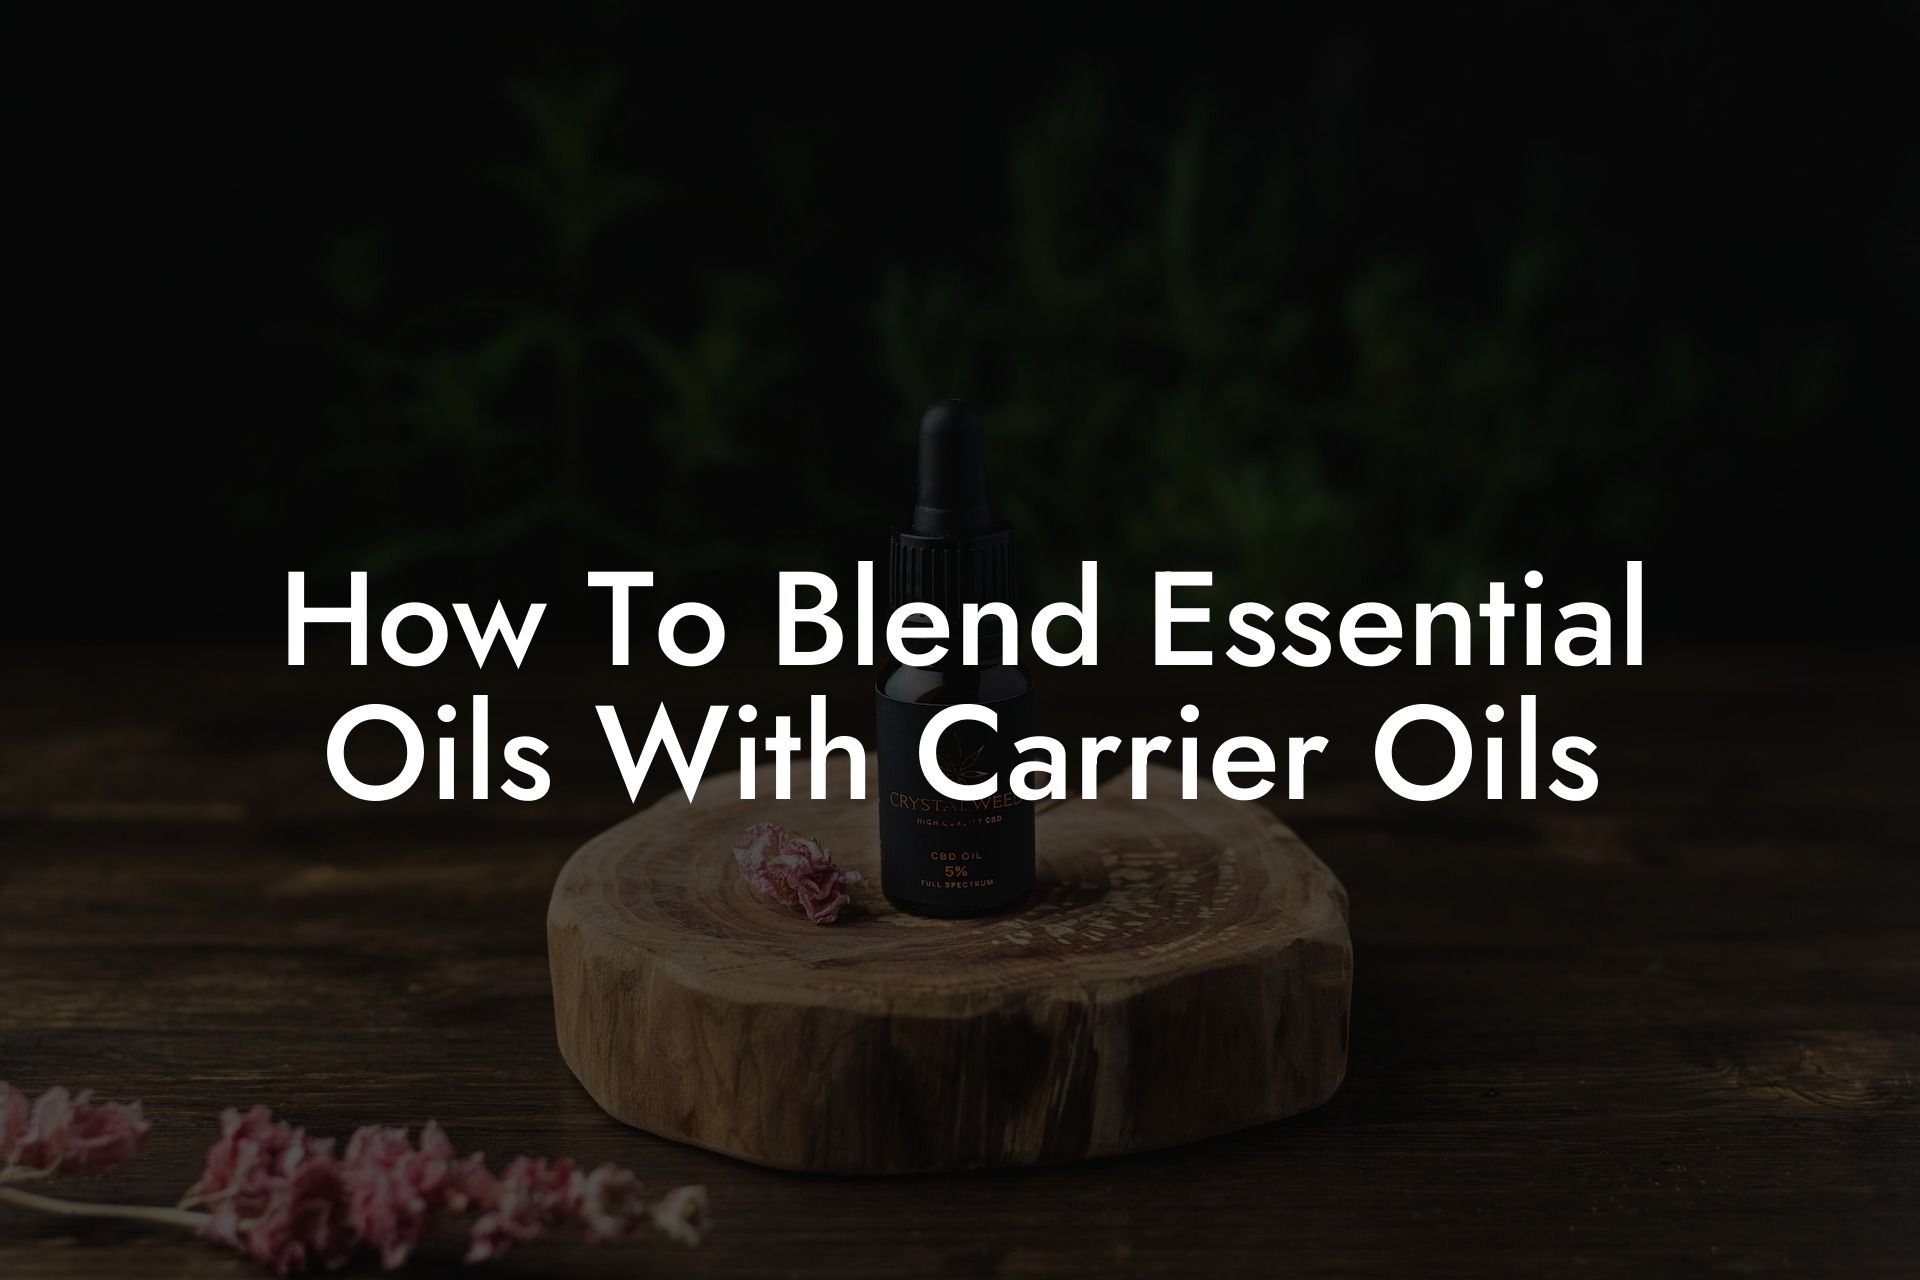 How To Blend Essential Oils With Carrier Oils